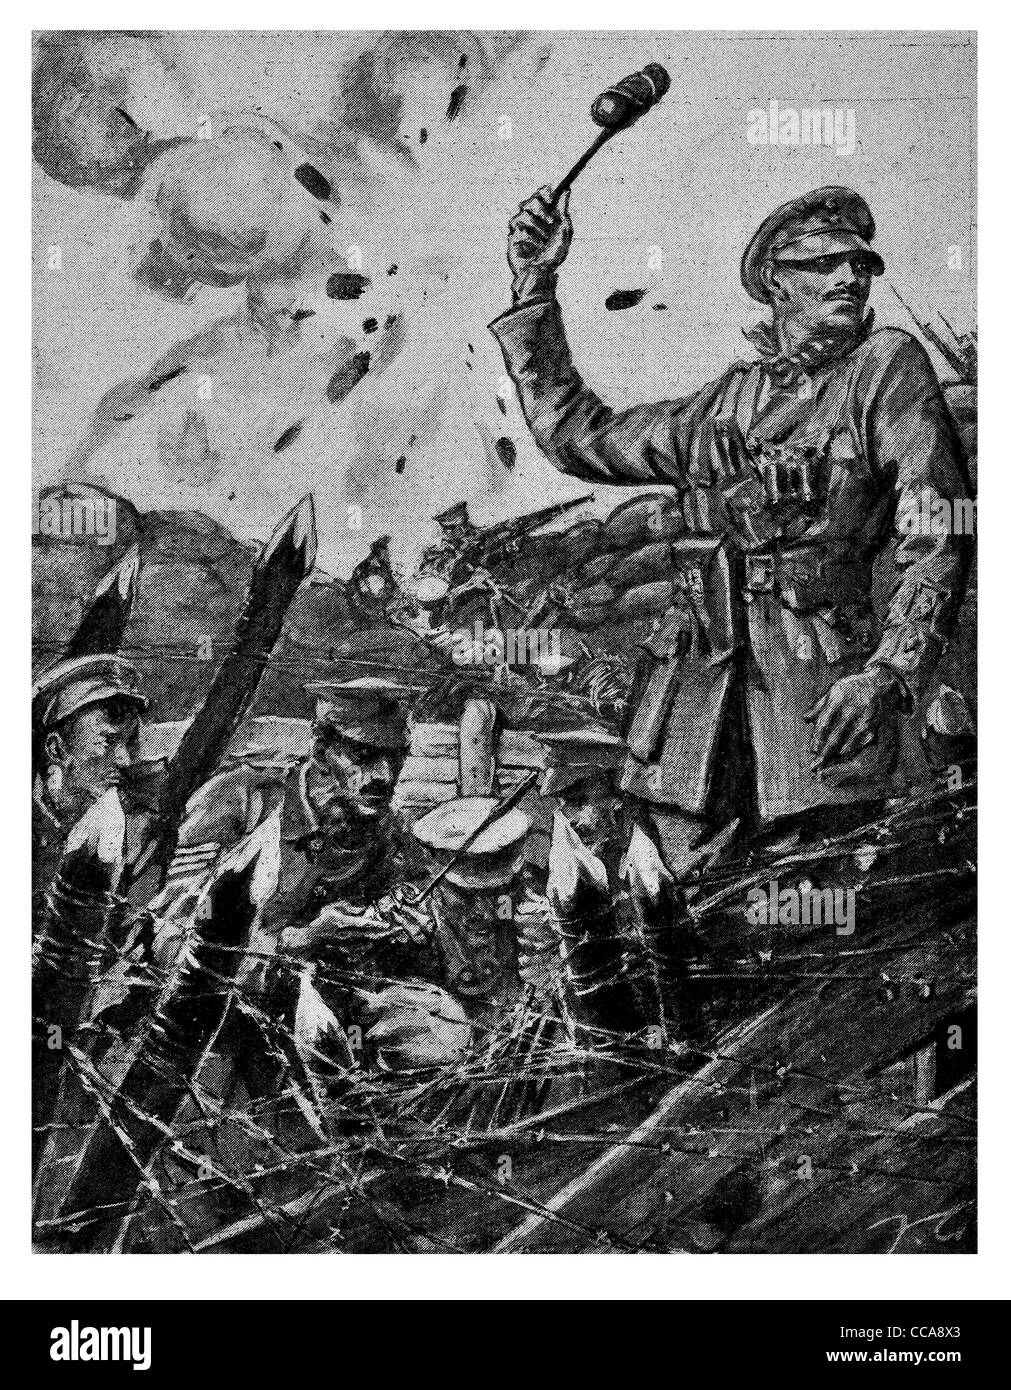 1915 Under artillery fire British soldier throwing hand grenade at Hohenzollern front line barbed wire trench explosion exploded Stock Photo